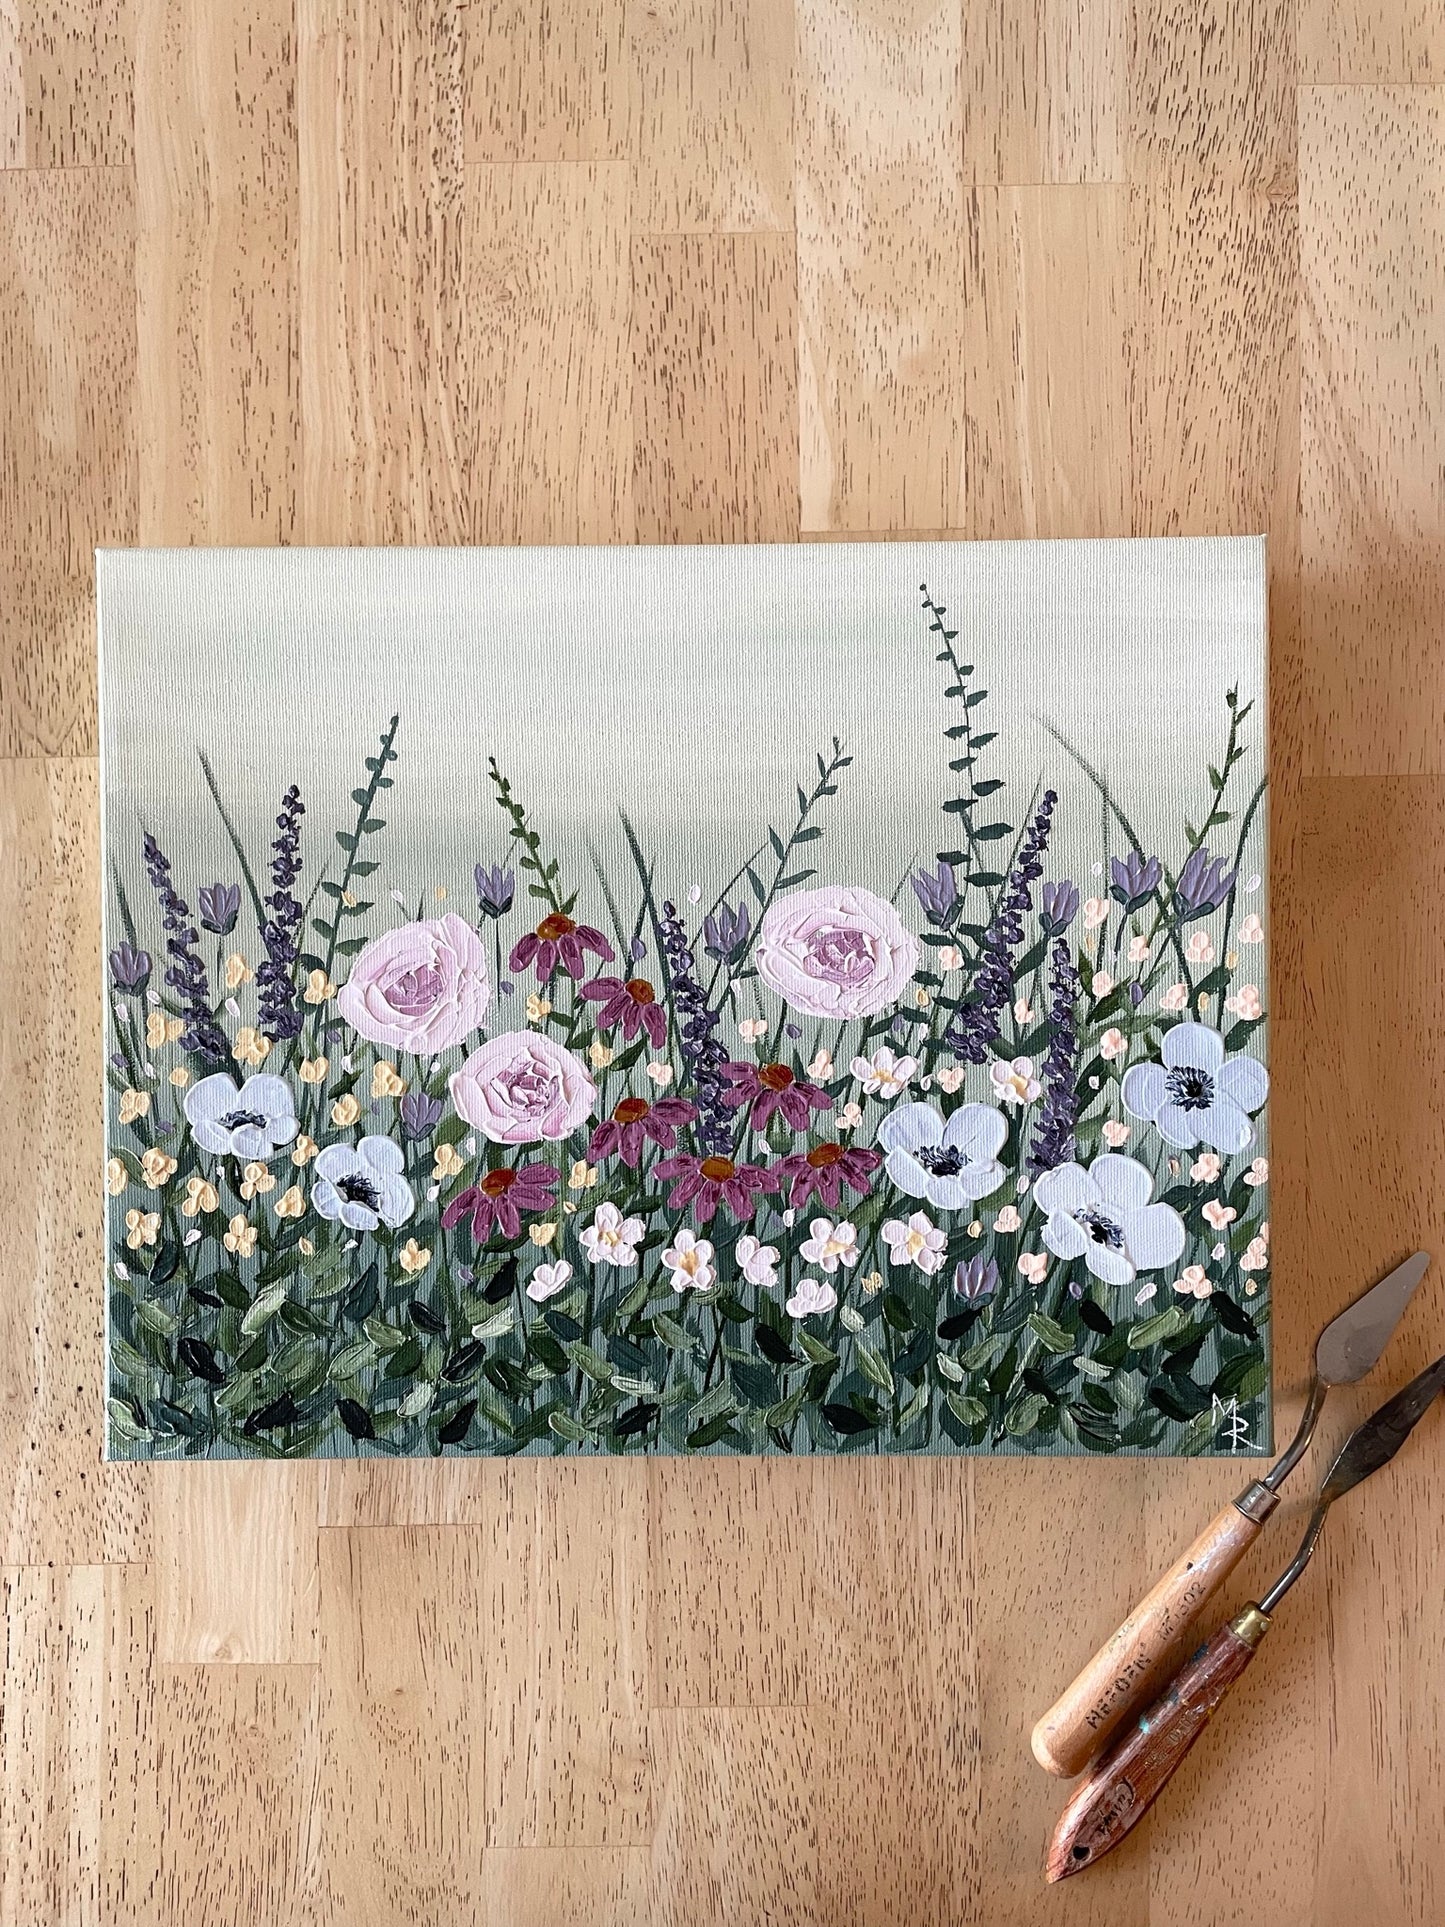 "Spring Blooms" acrylic painting